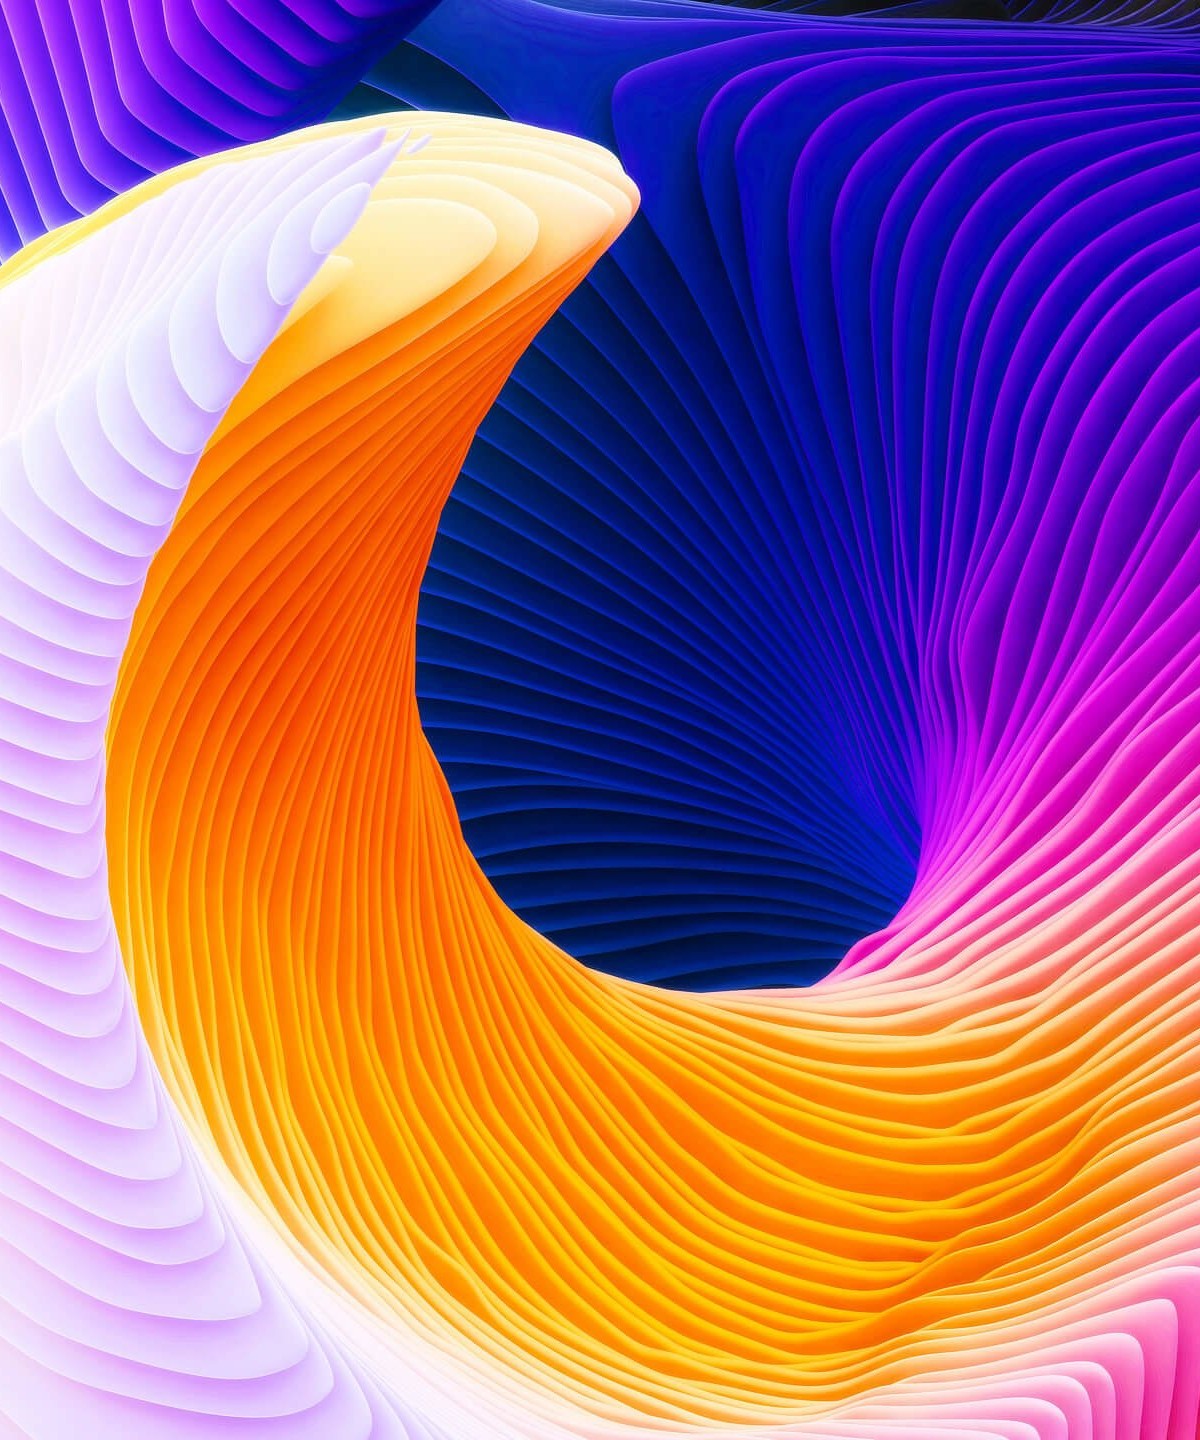 Download Colorful Spiral HD wallpaper for Kindle Fire HDX ...